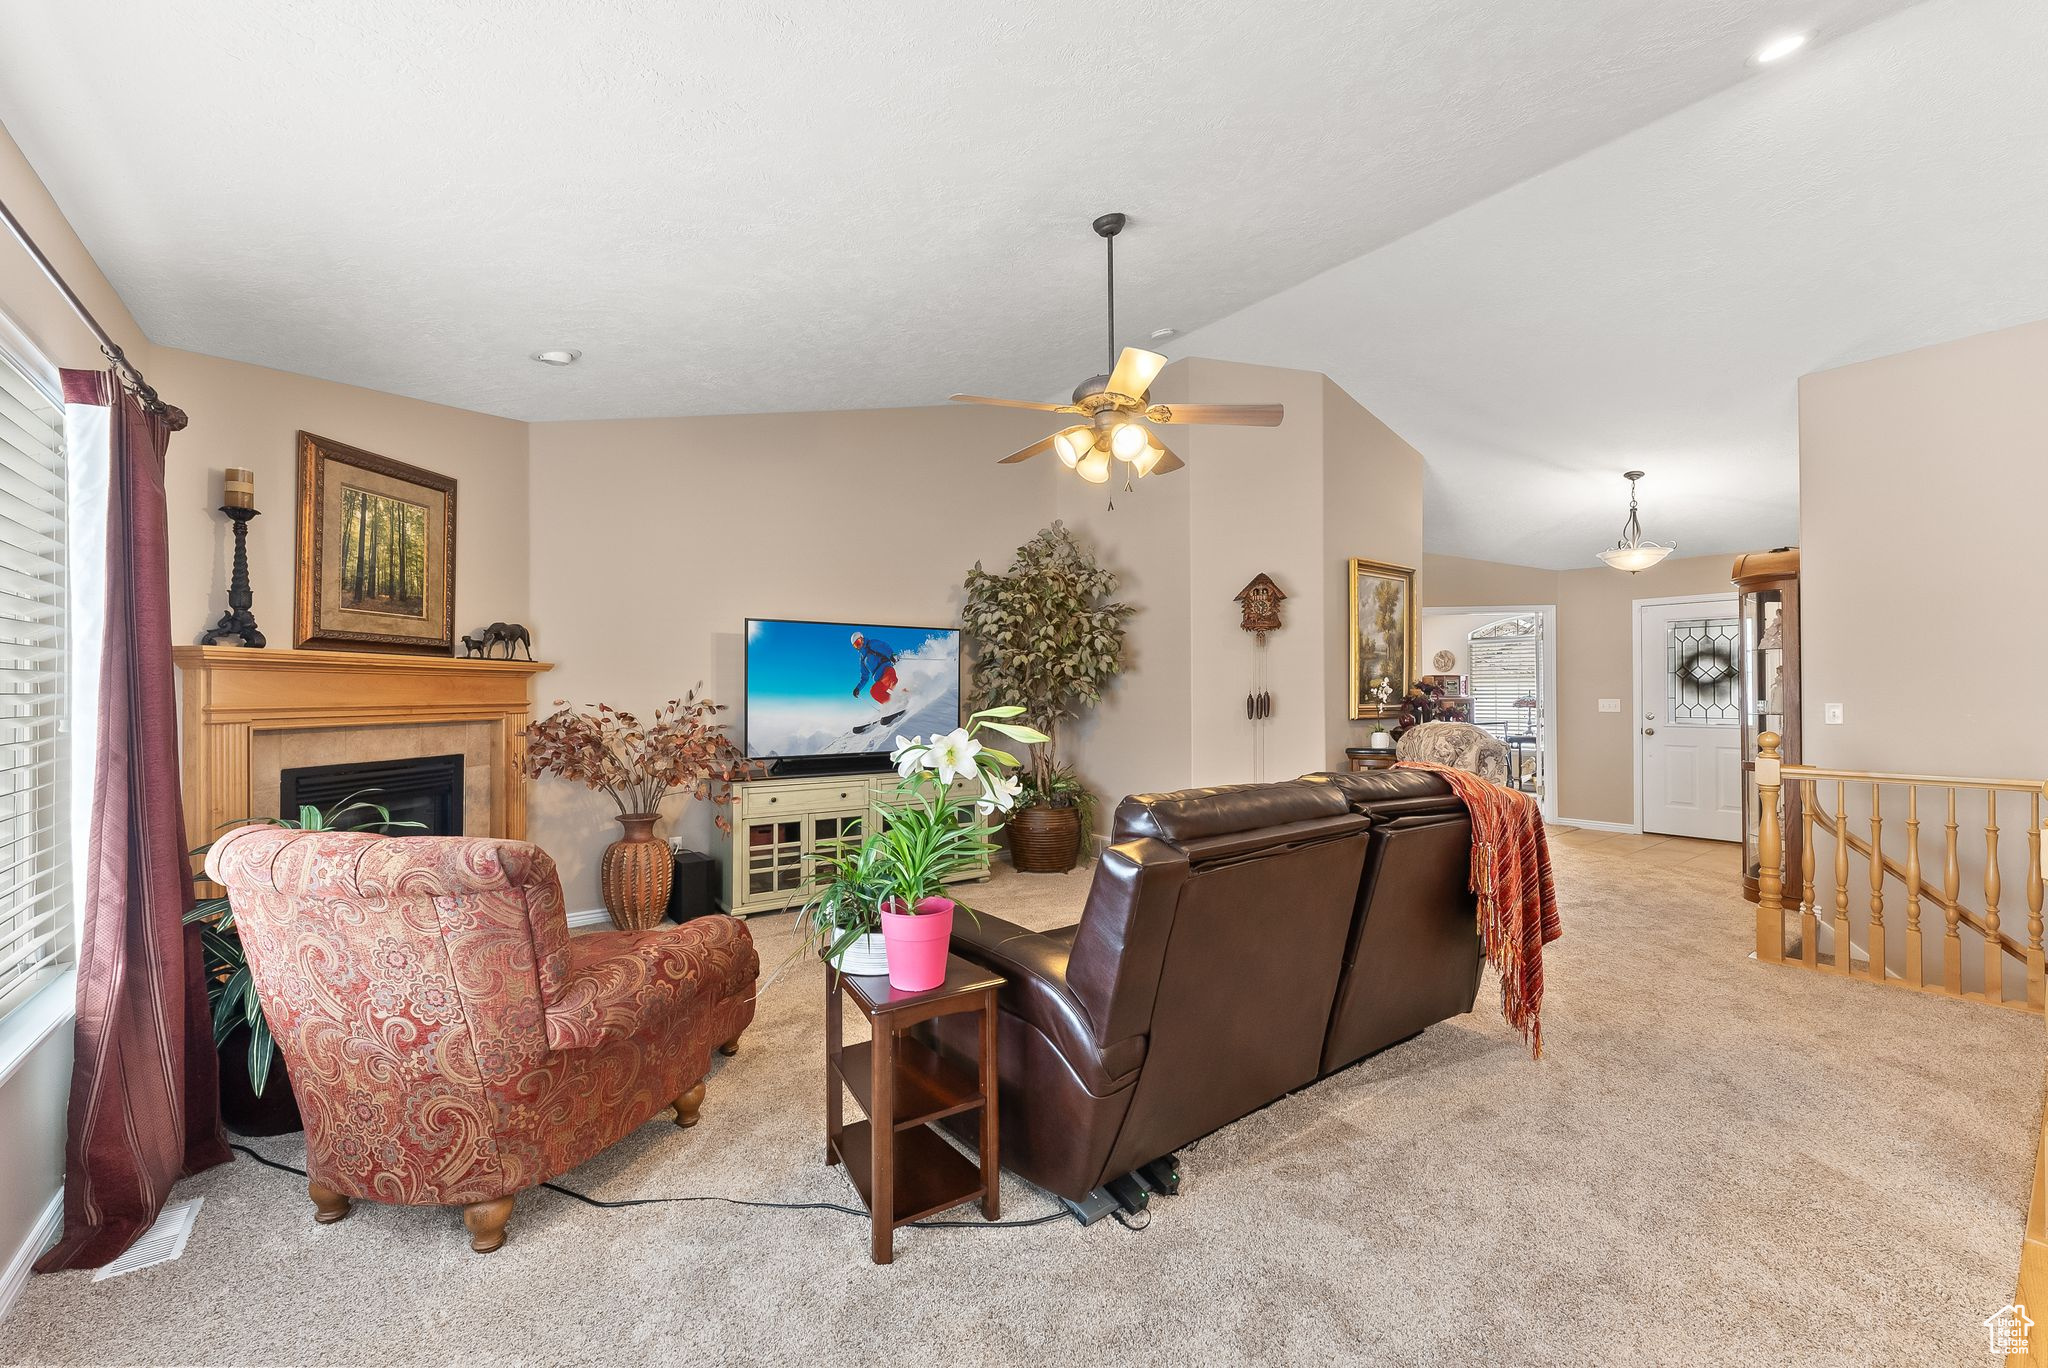 Living room featuring light carpet, ceiling fan, and vaulted ceiling